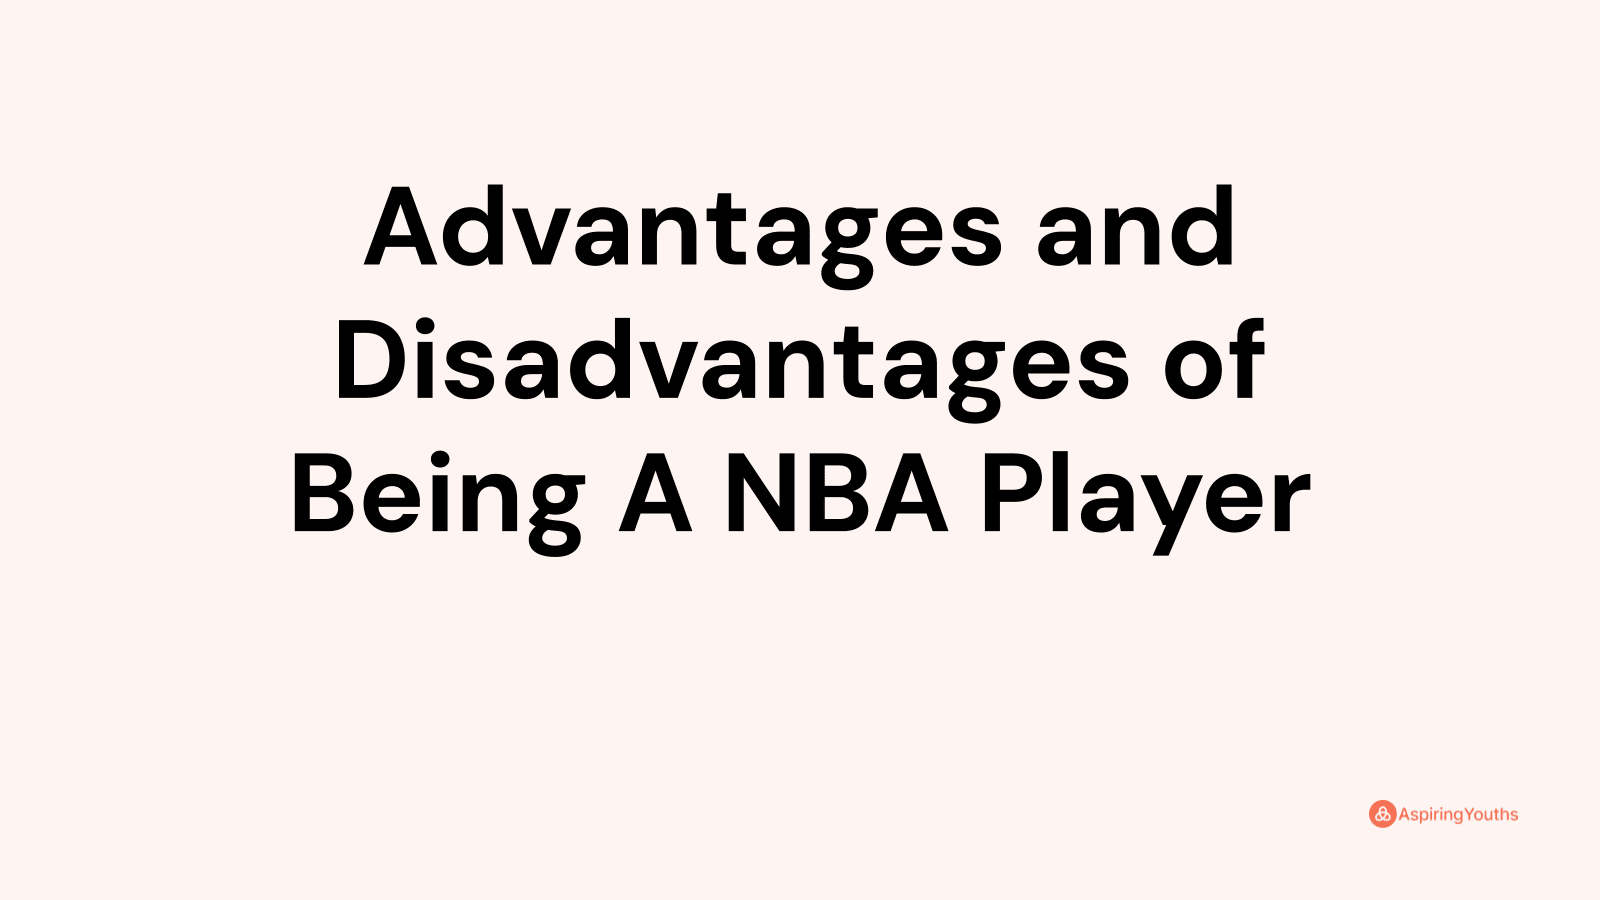 Advantages and disadvantages of Being A NBA Player